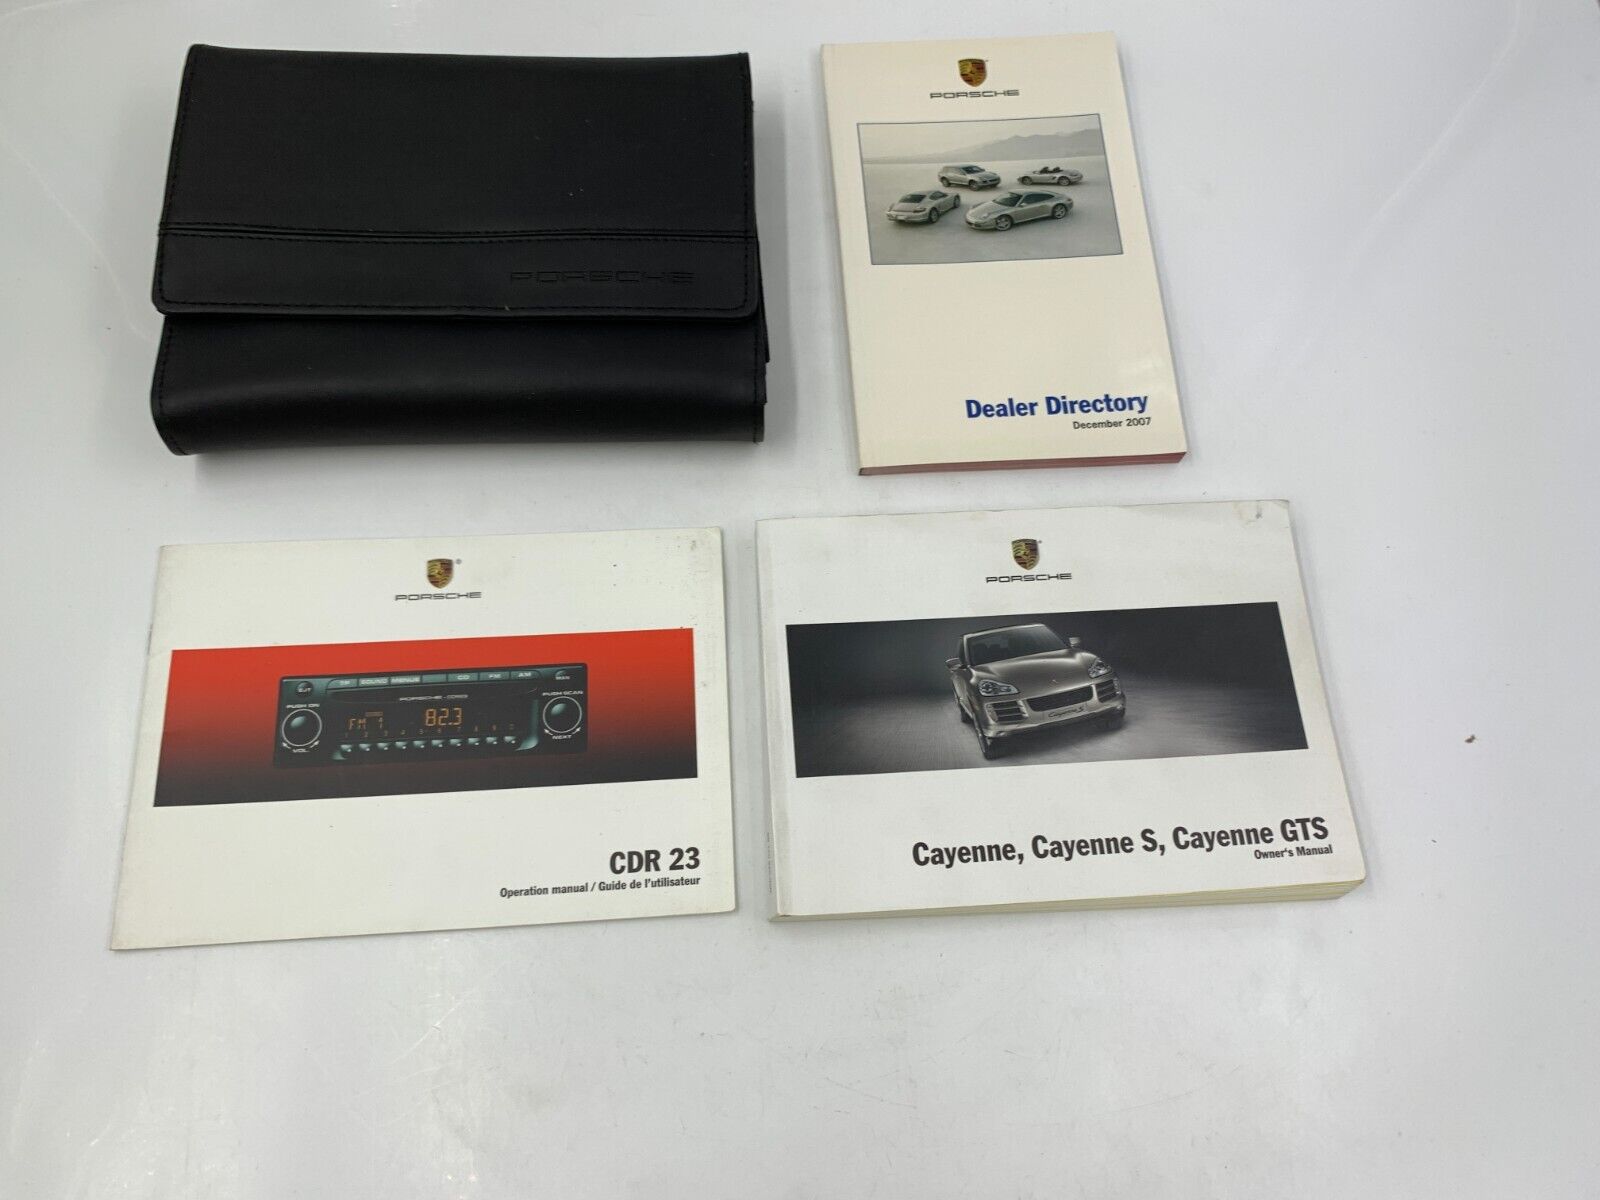 2008 Porsche Cayenne, S, Cayenne GTS Owners Manual Set with Case OEM K02B28026